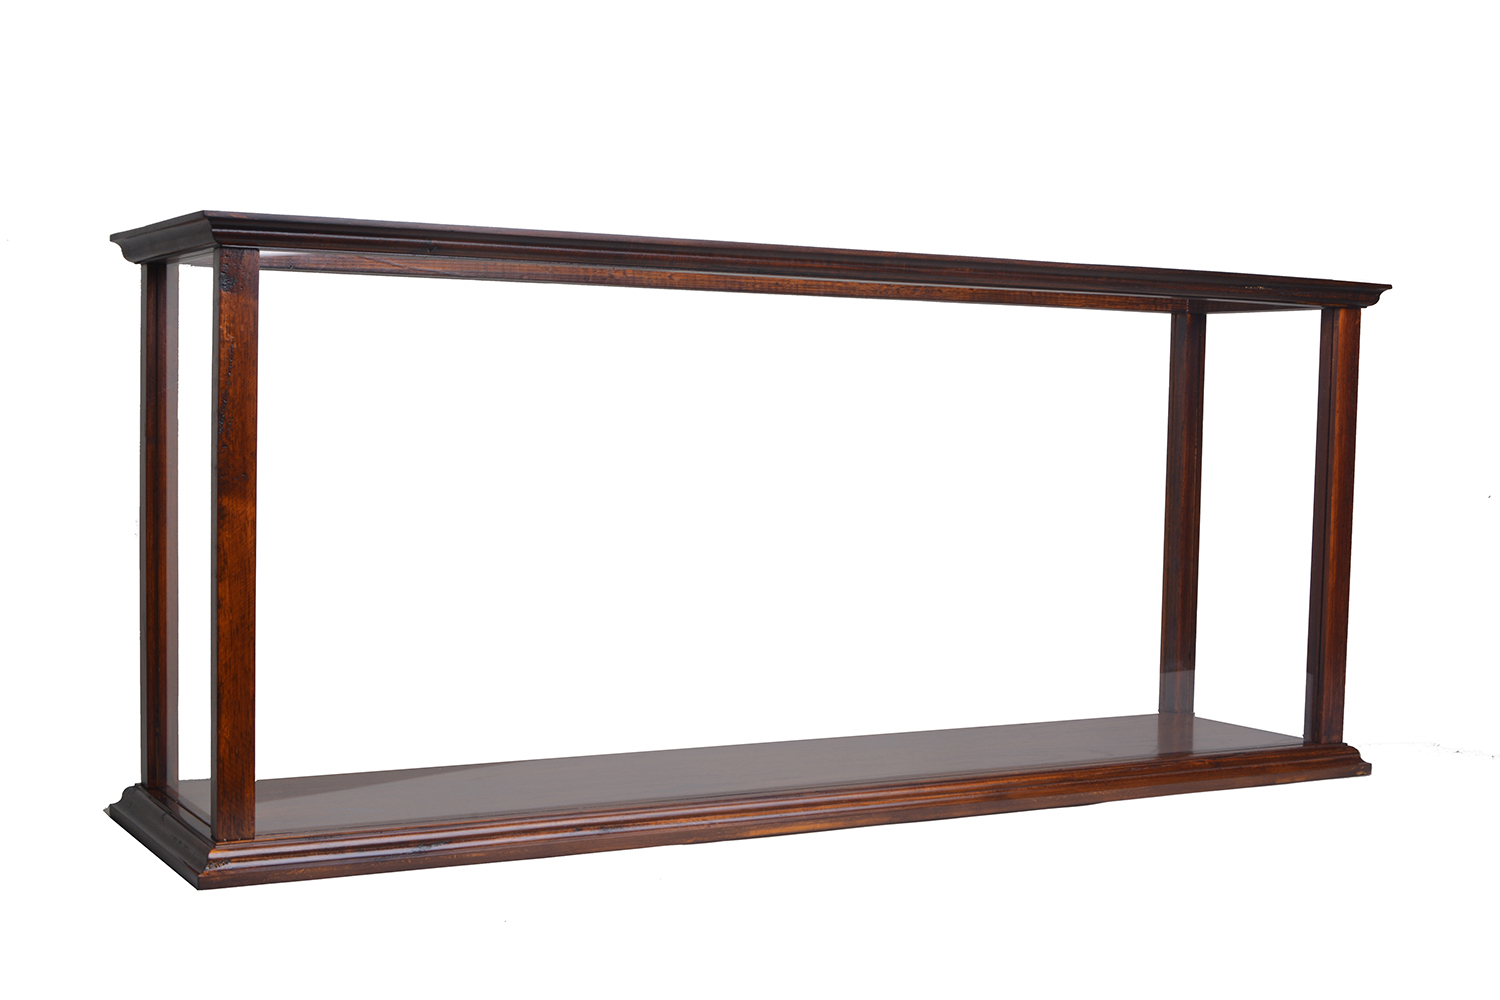 P096 Display Case for Cruise Liner Midsize Classic Brown p096-display-case-for-cruise-liner-midsize-classic-brown-l01.jpg